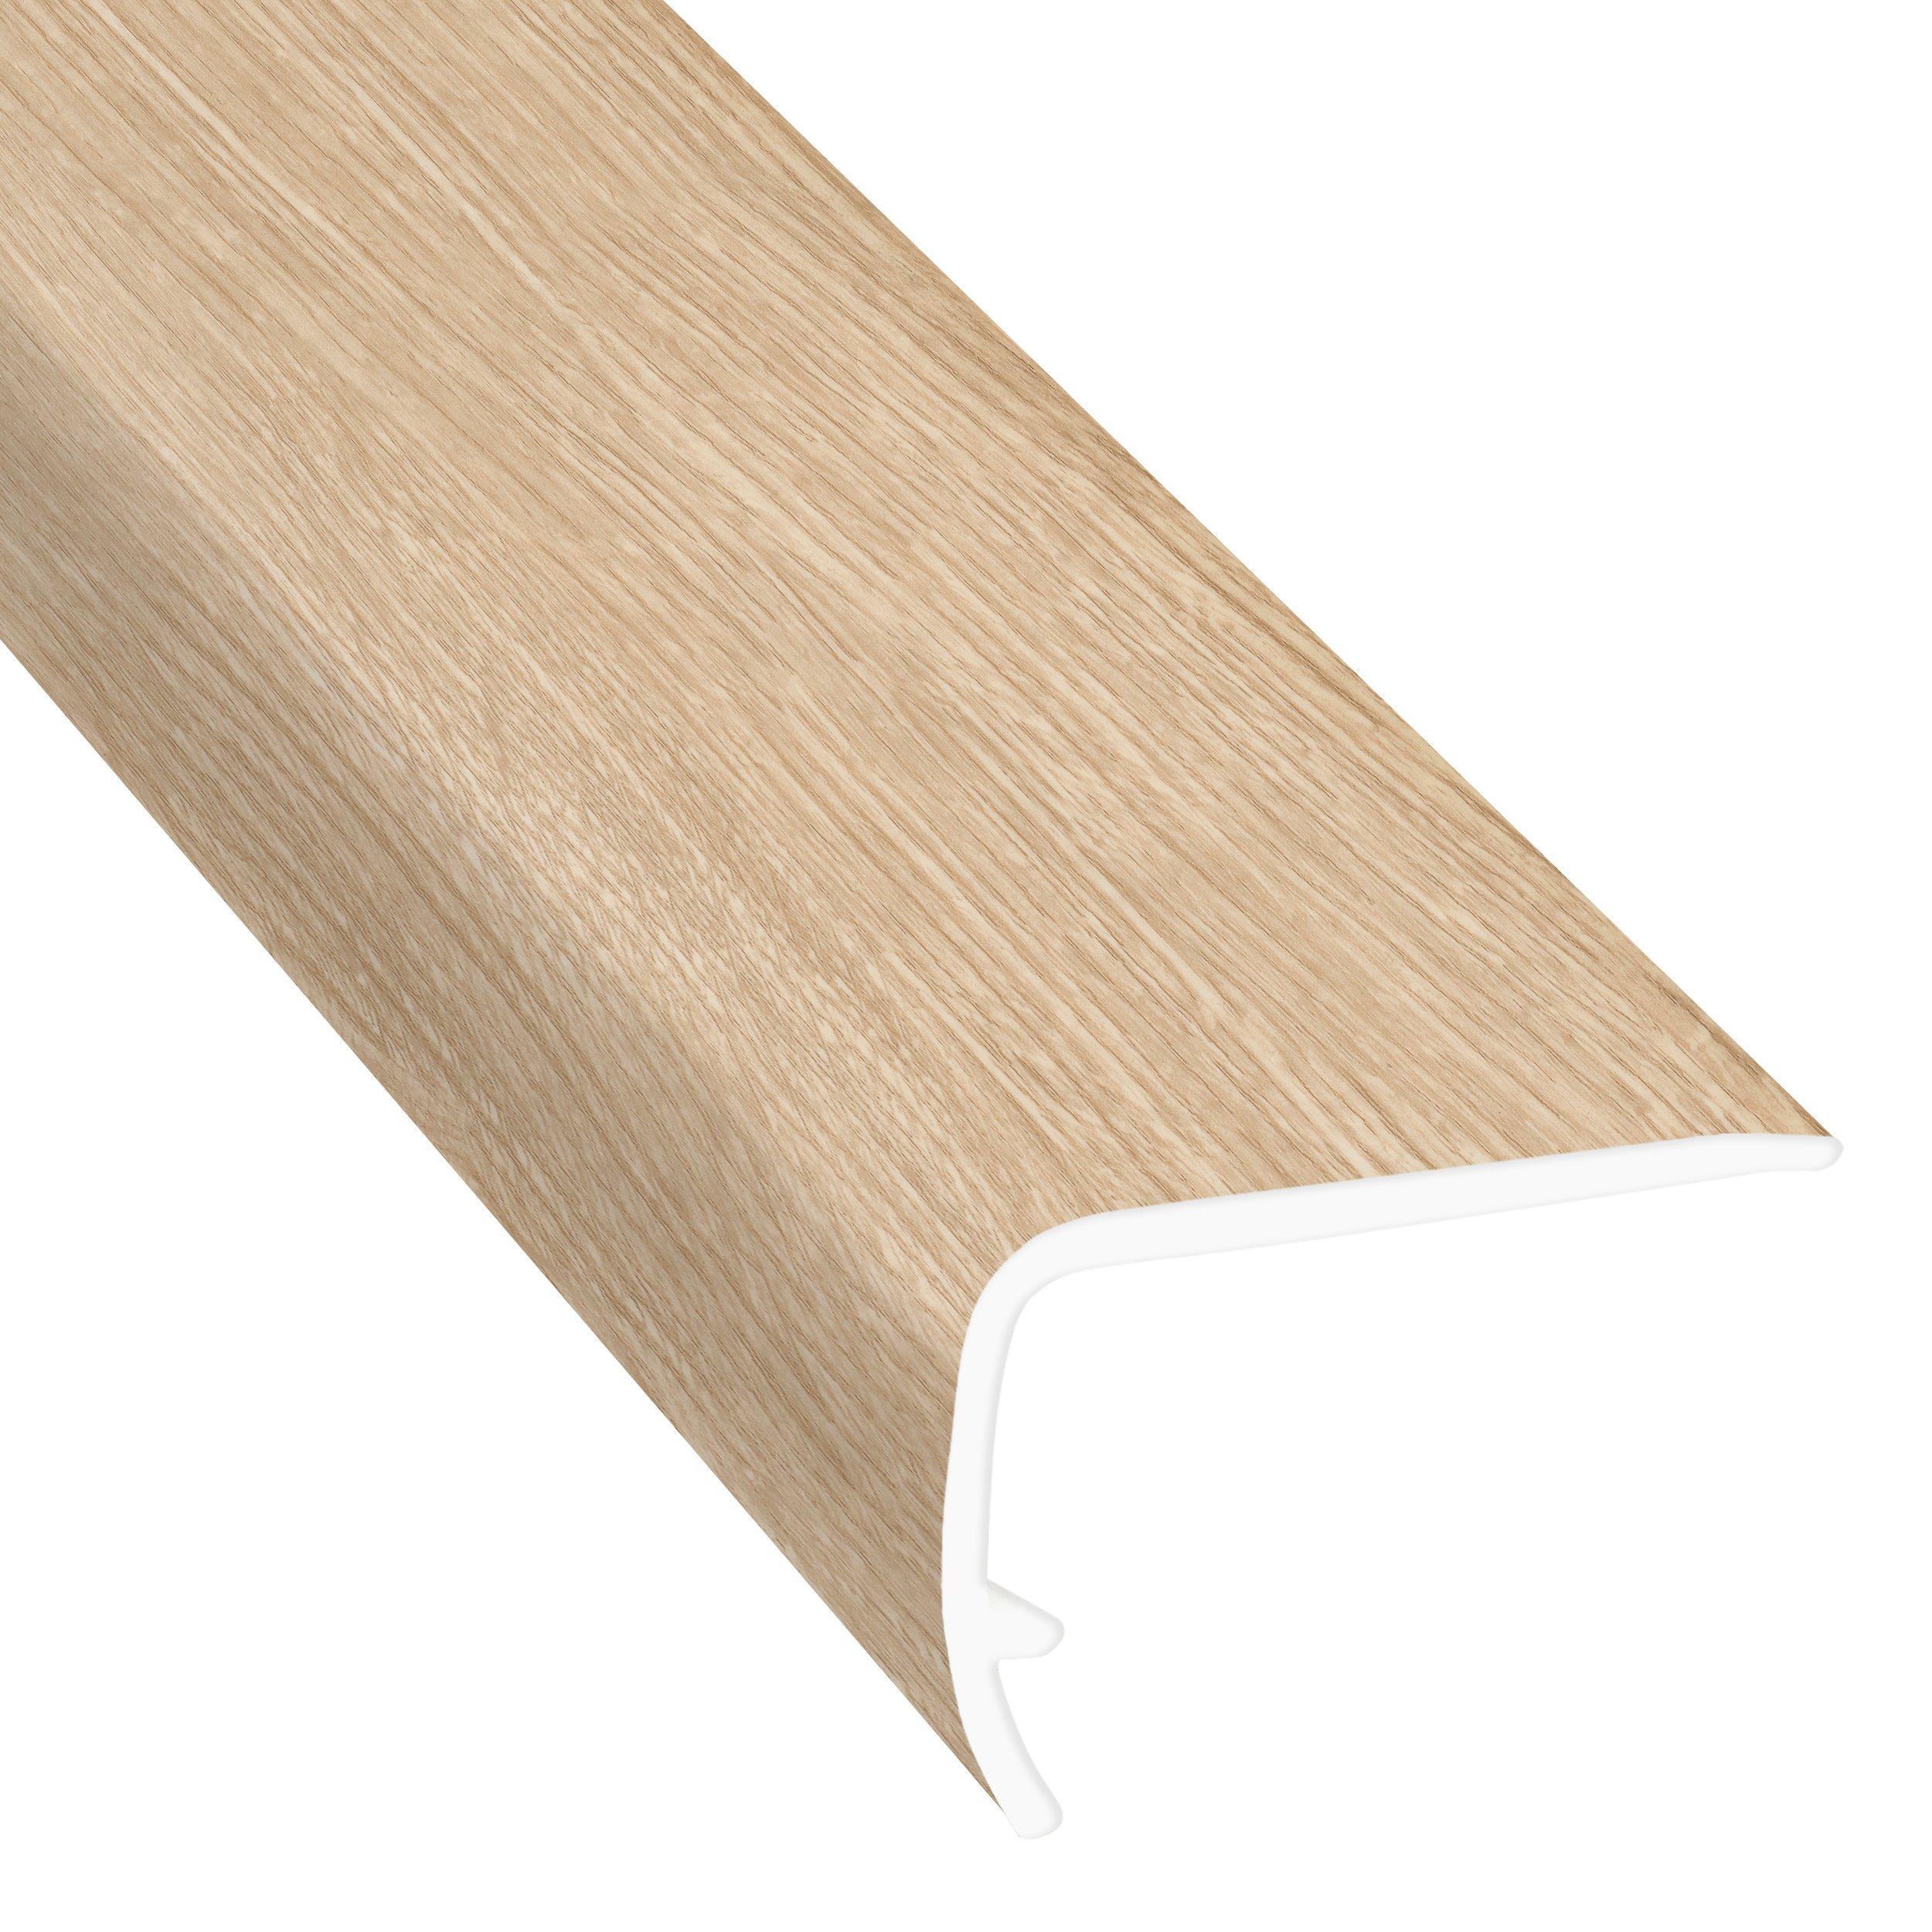 Color 5405F 94in. Vinyl Overlapping Stair Nose